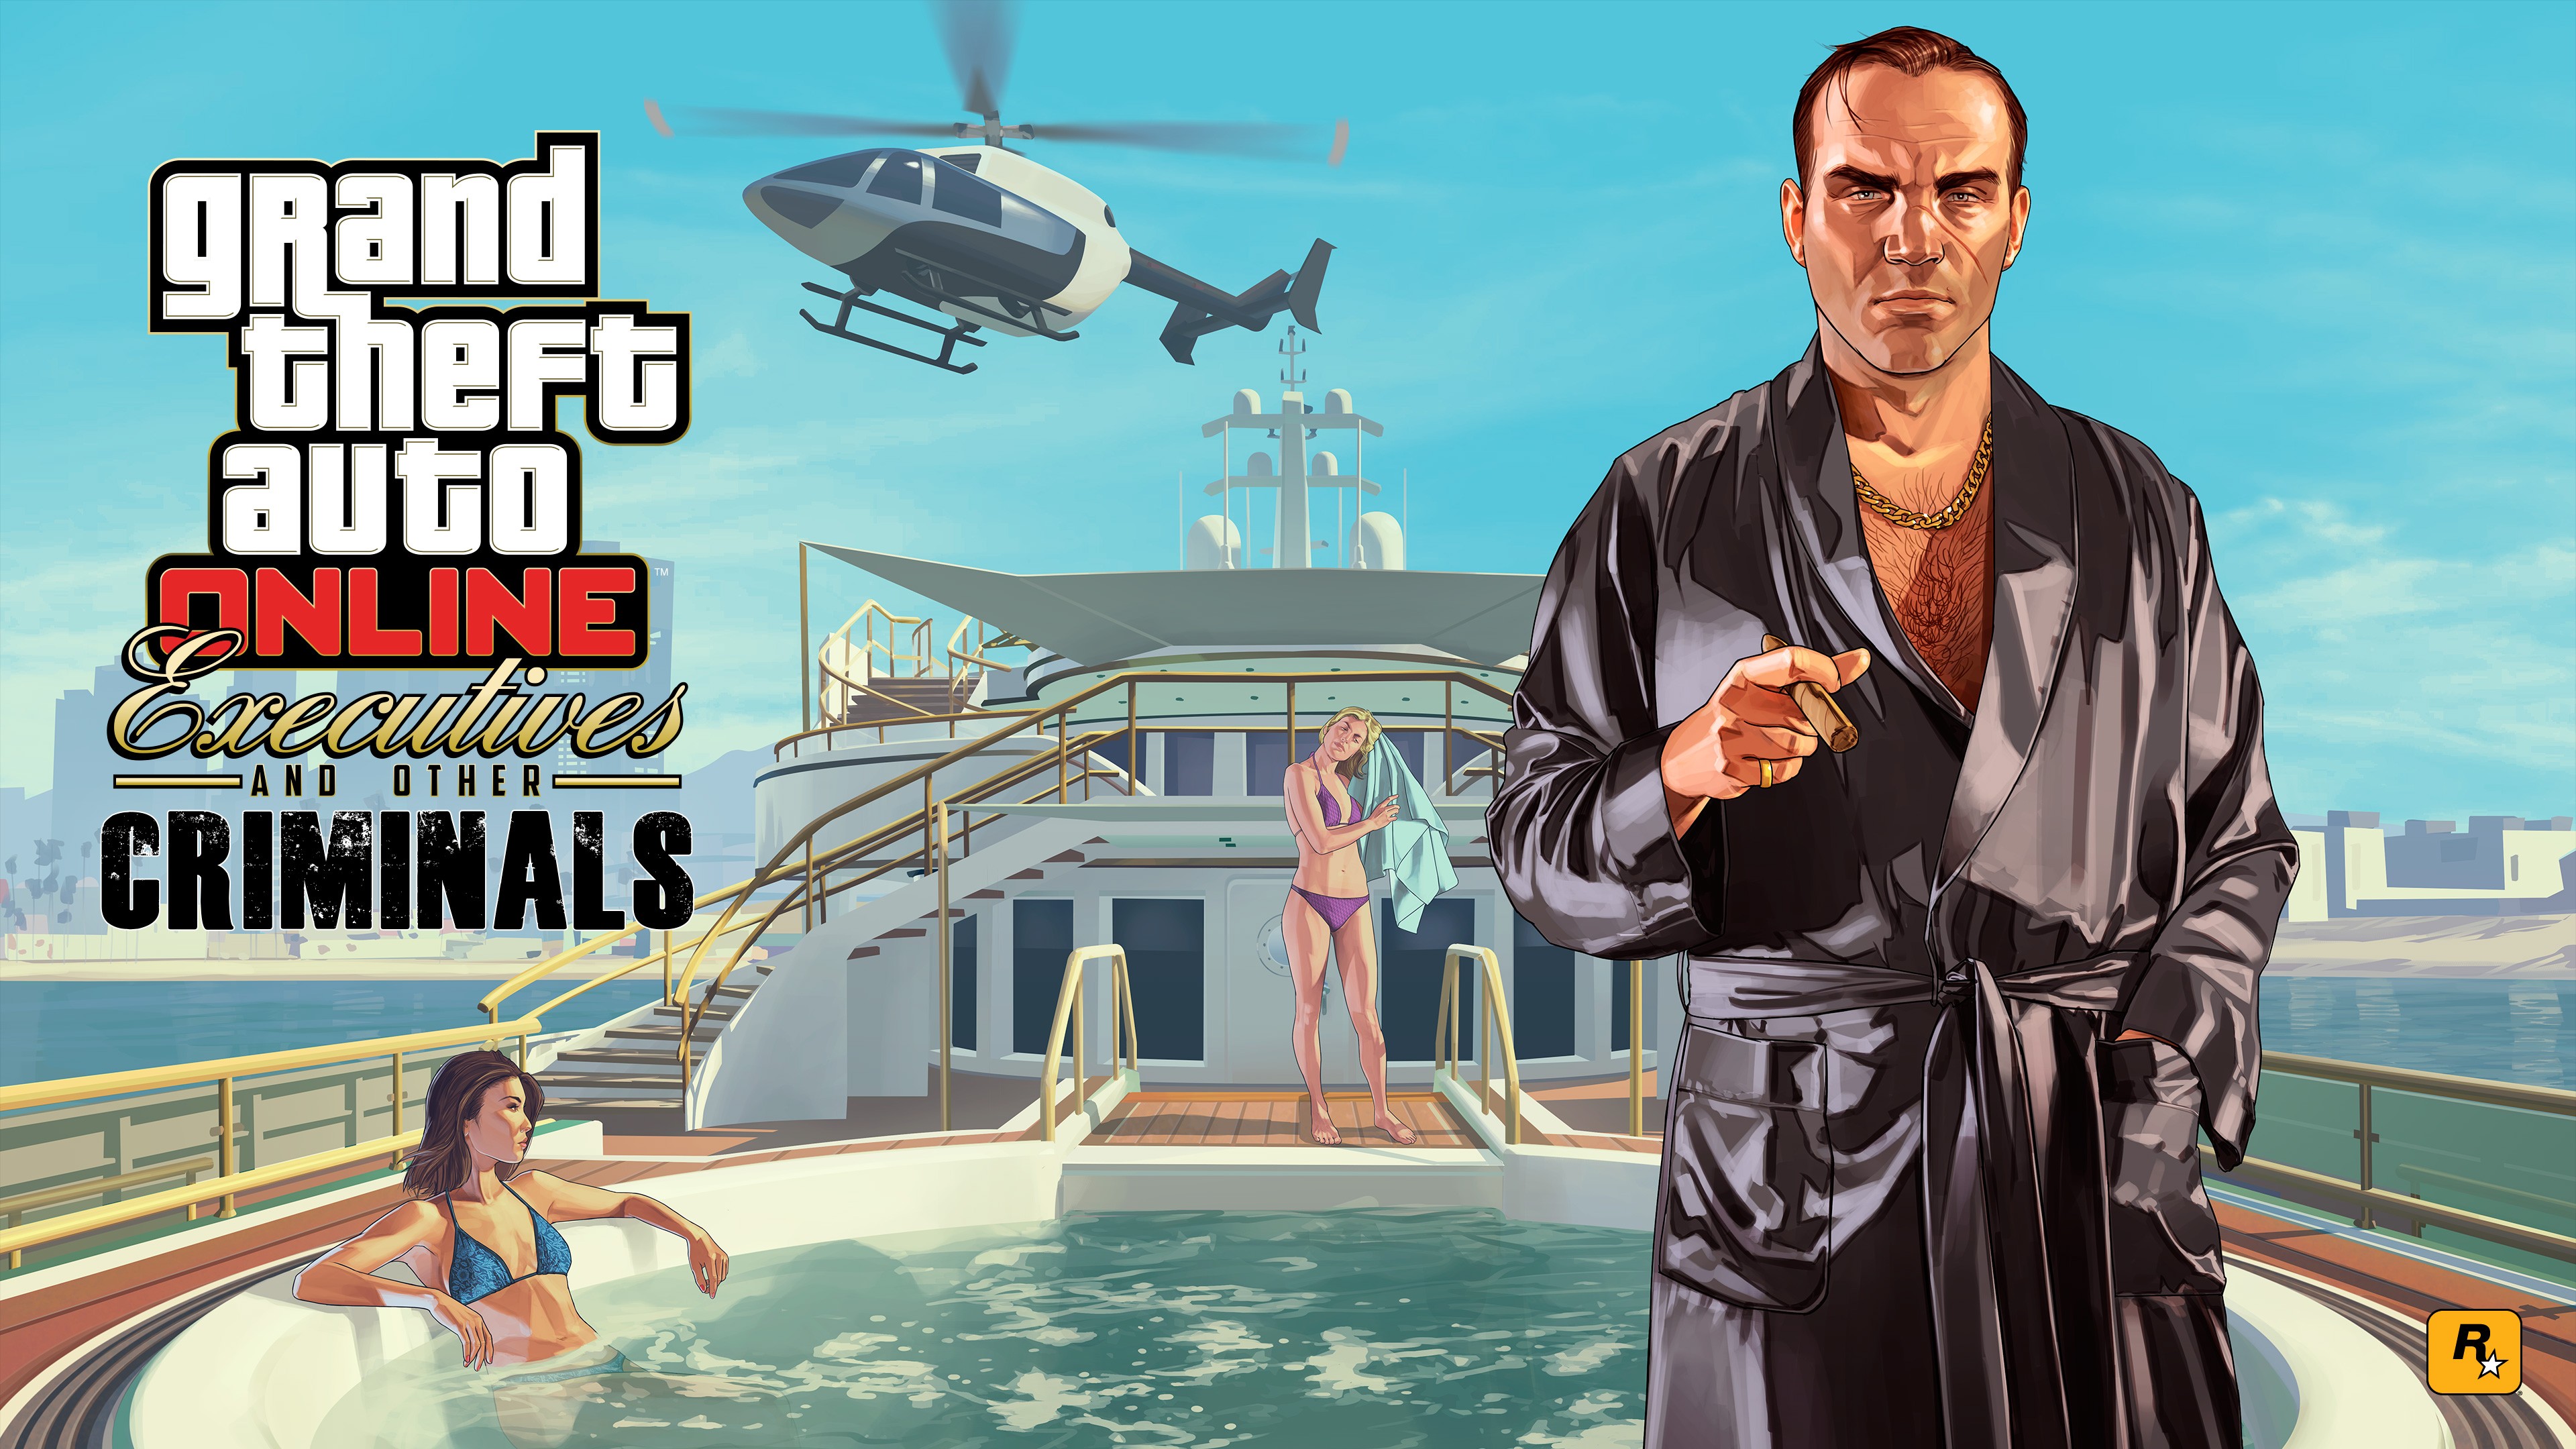 Grand Theft Auto V, Grand Theft Auto V Online, Yacht, Helicopters, Cigars, Helipads, Rockstar Games Wallpaper